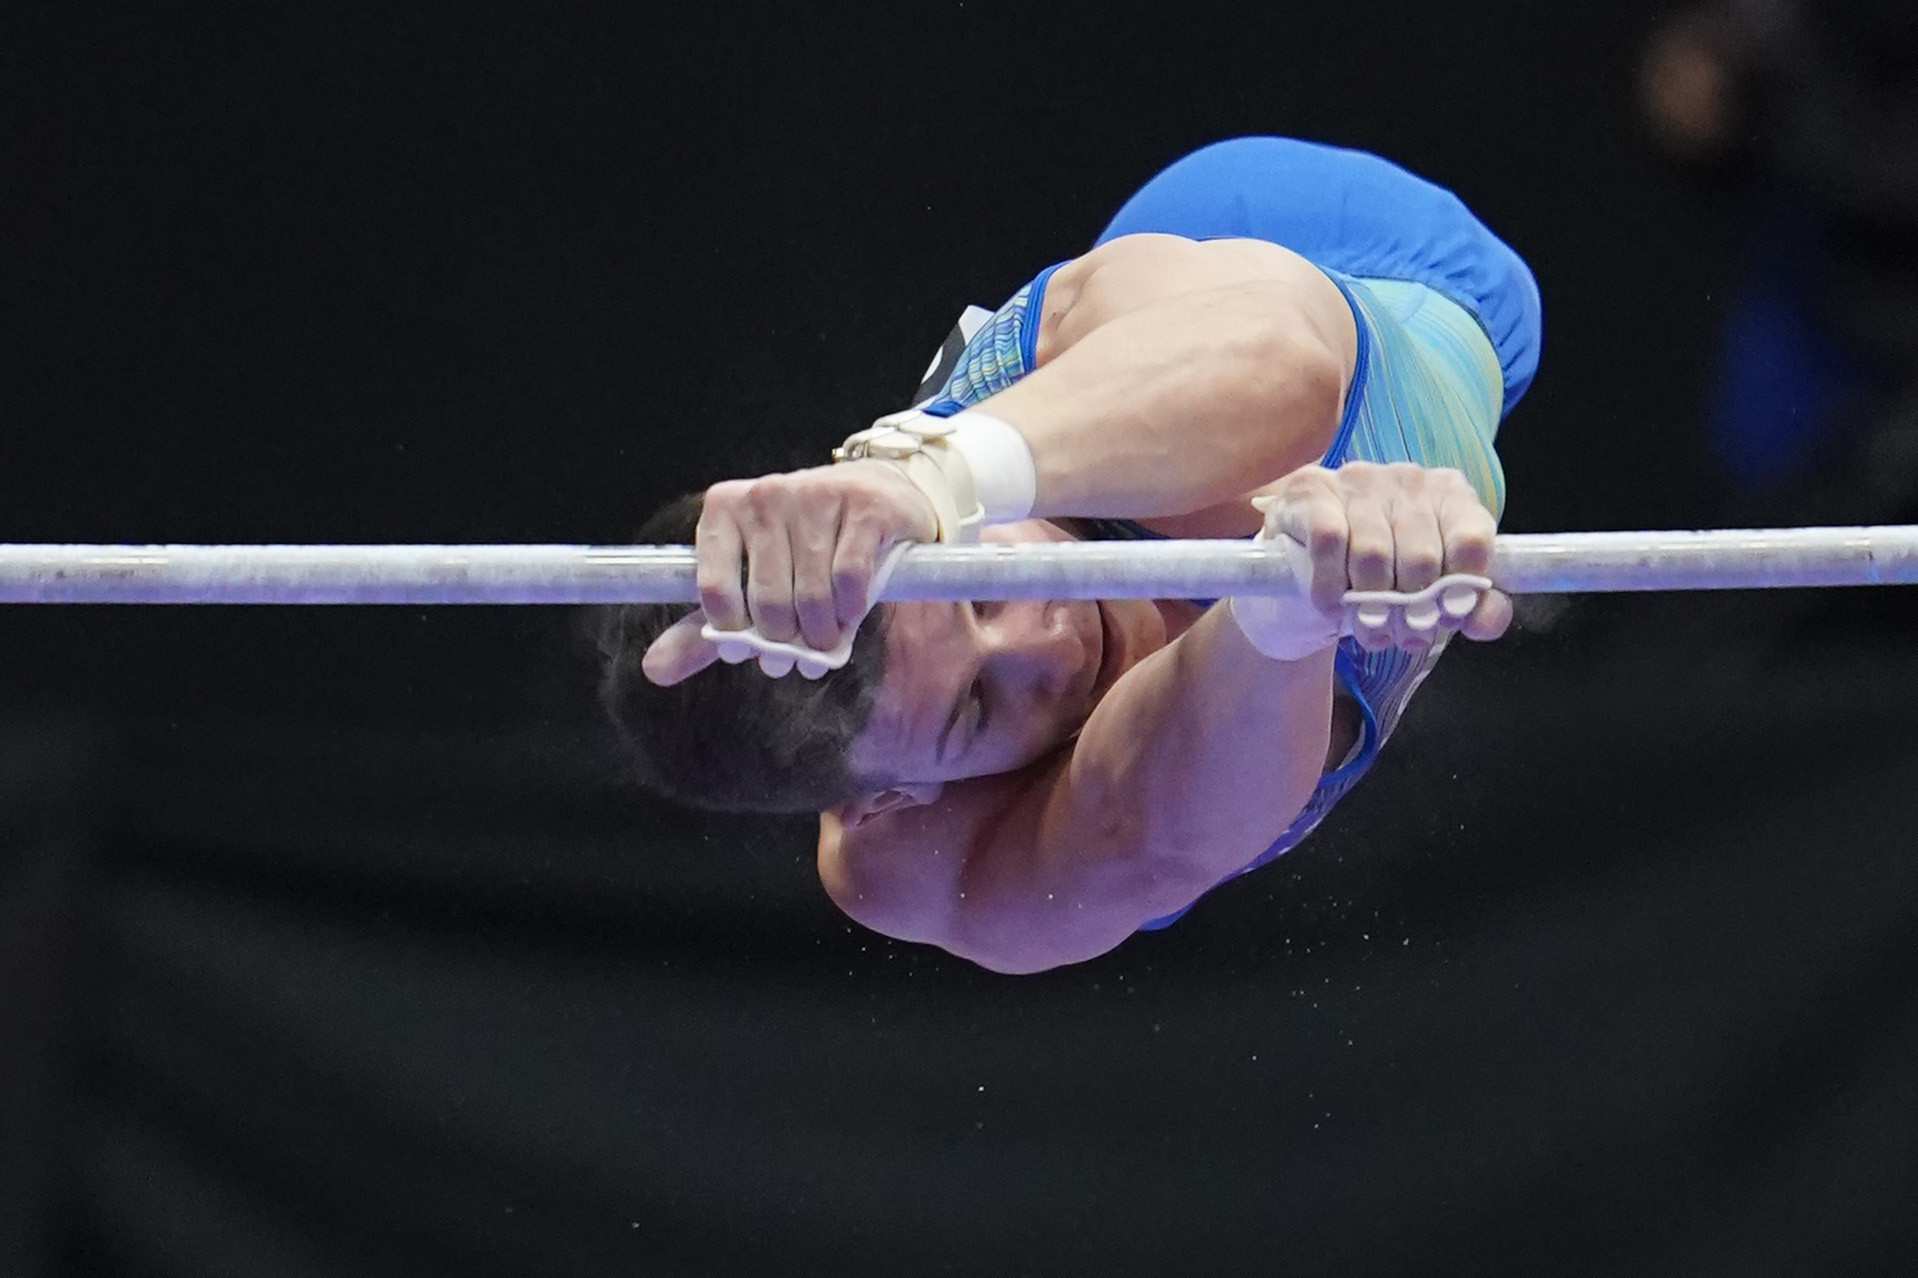 Ukraine secure three medals on final day of FIG World Cup in Baku